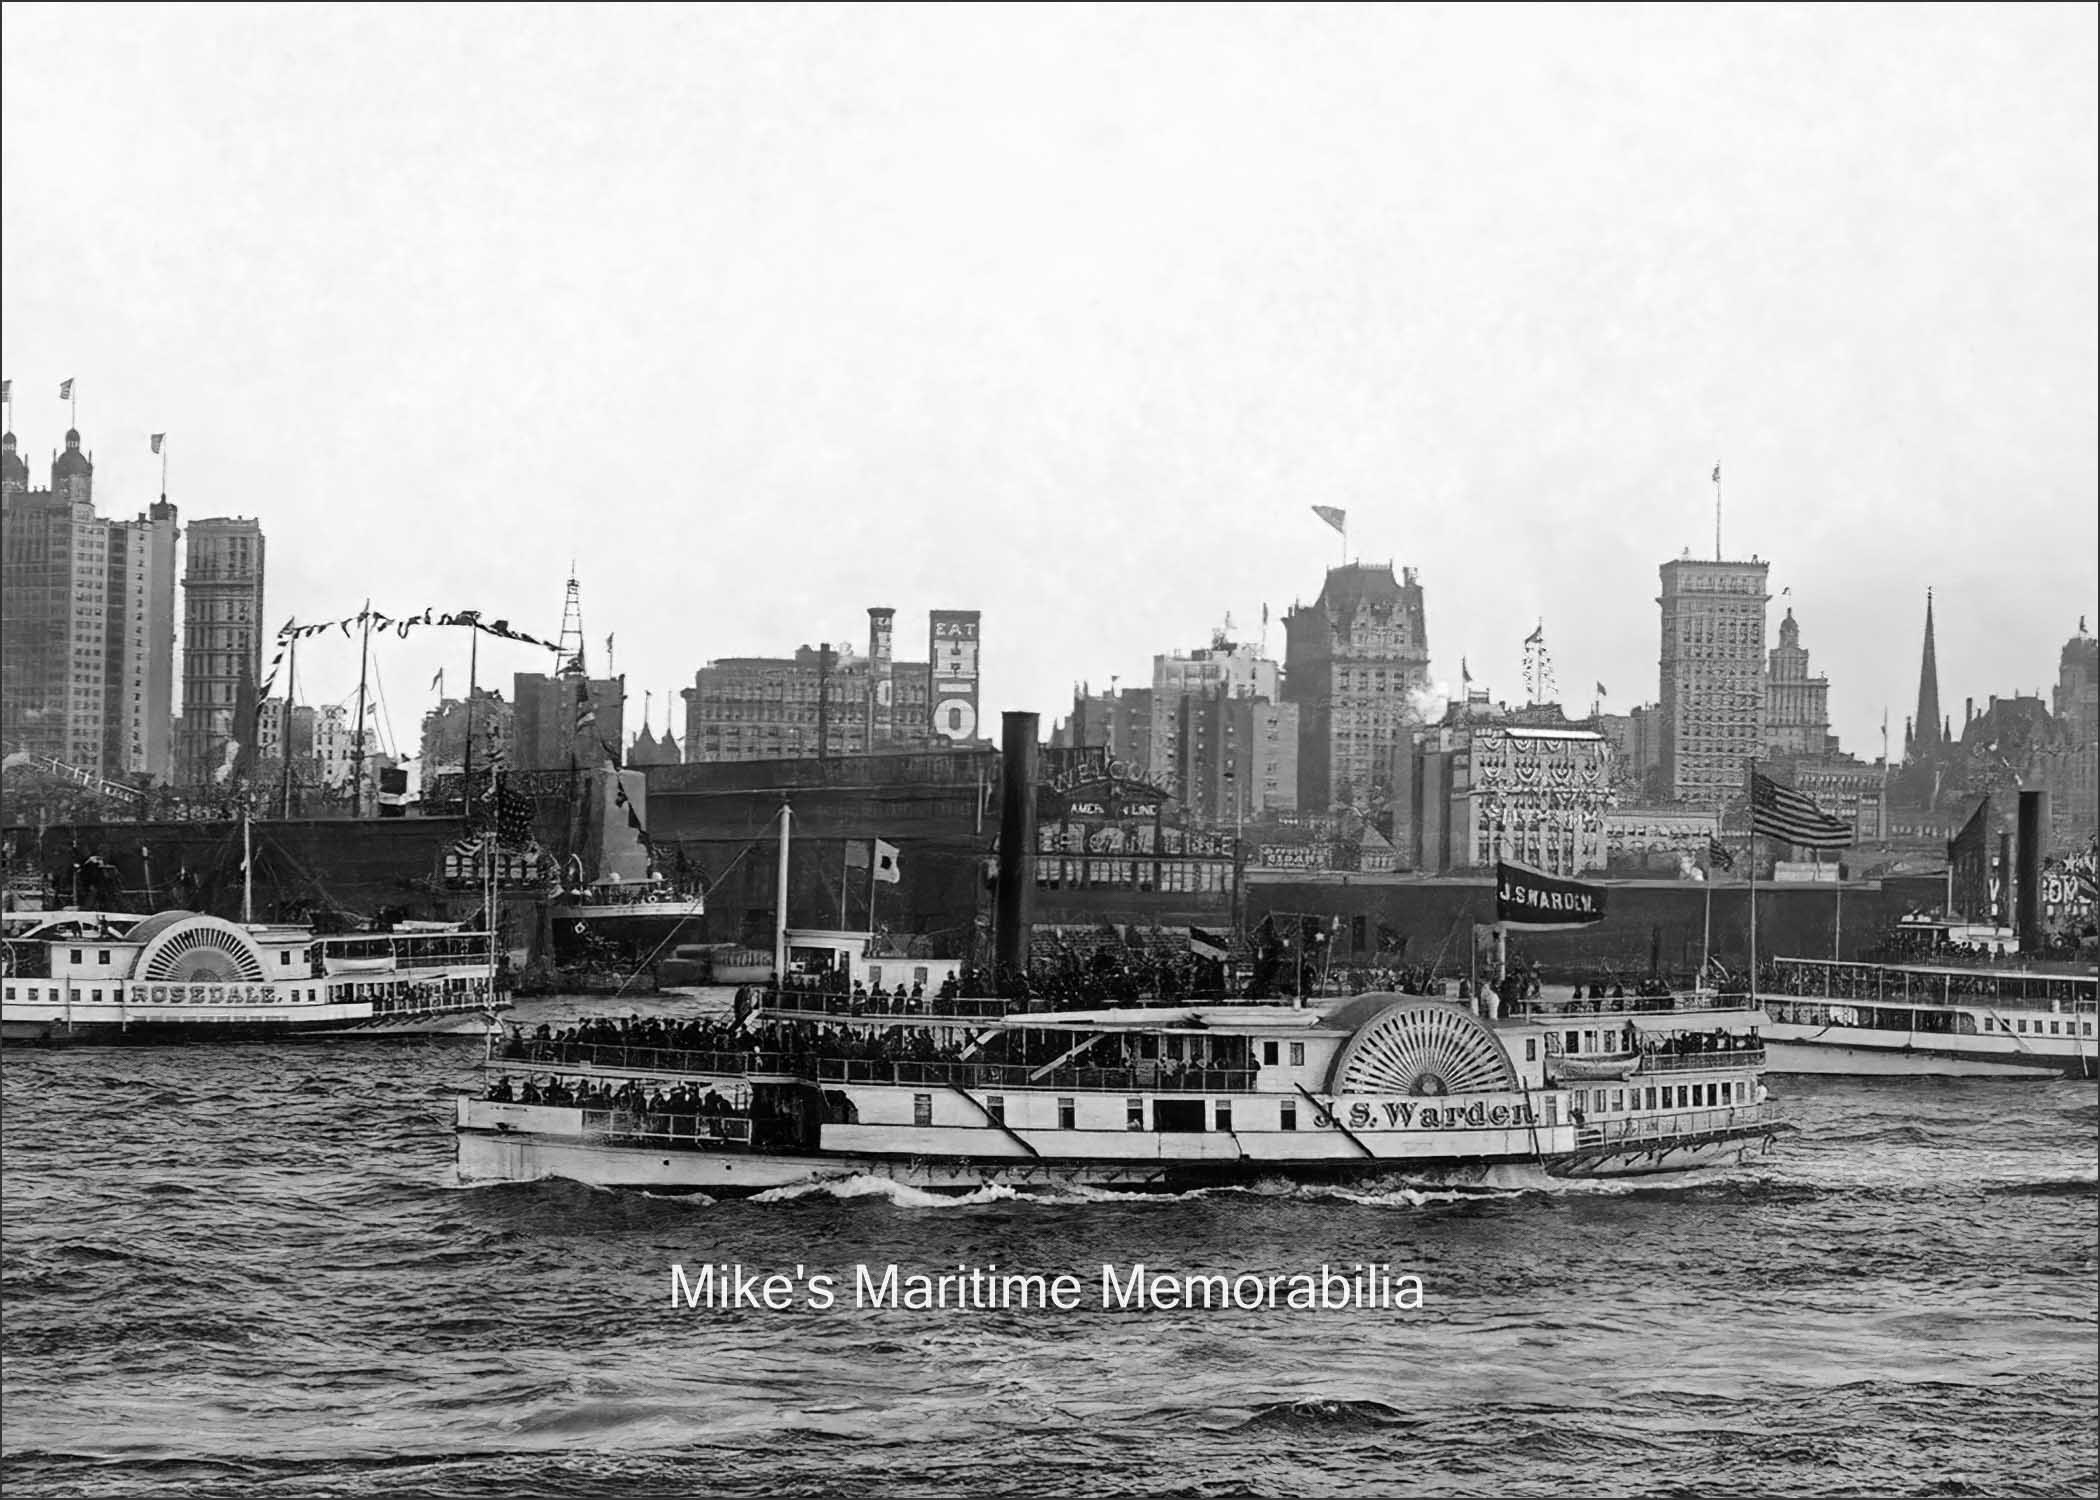 J.S. WARDEN, New York, NY – 1895 The "J.S. WARDEN" was another triple-decker sidewheeler steamboat that made regular trips from Manhattan to the local fishing banks. She was 172 feet in length and was built in 1863 at Jersey City, NJ as the "ELIZA HANCOX". Captain Henry Beebe, who was another pioneer party boat pilot, operated her as the "J.S. WARDEN". Like Captain Albert Foster, he too located and named several local fishing areas including the "Klondike Banks".